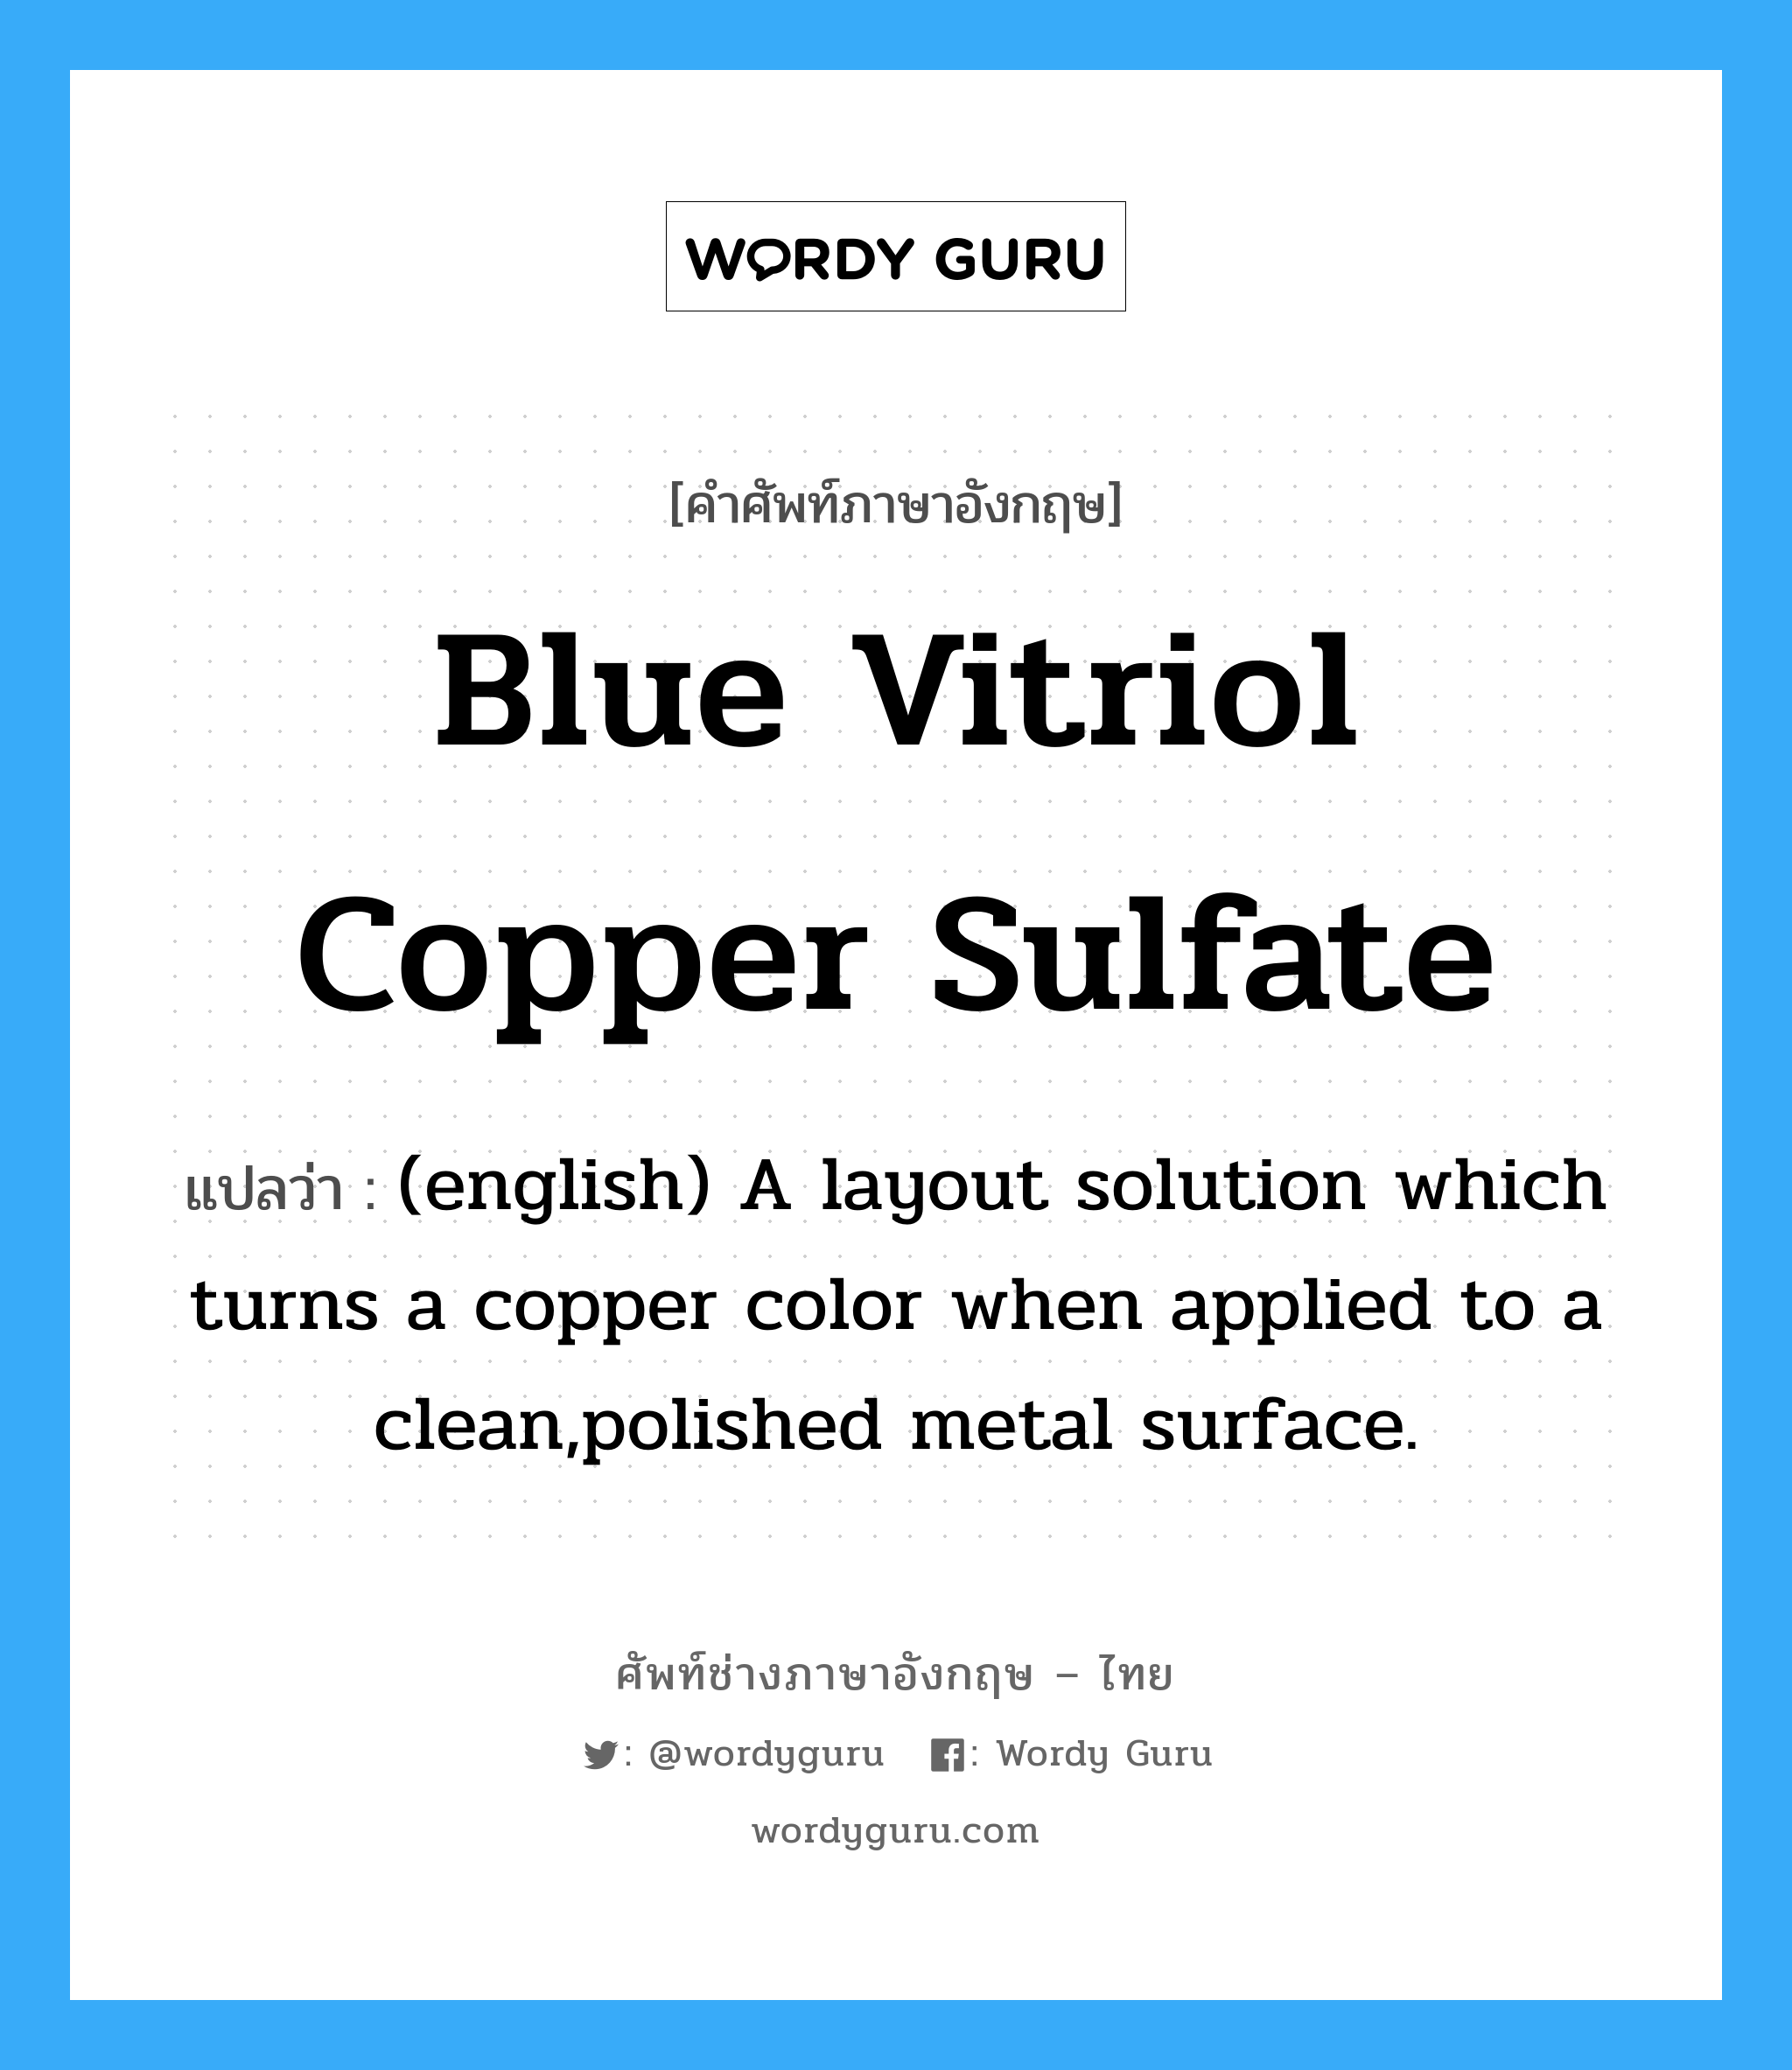 Blue Vitriol Copper sulfate แปลว่า?, คำศัพท์ช่างภาษาอังกฤษ - ไทย Blue Vitriol Copper sulfate คำศัพท์ภาษาอังกฤษ Blue Vitriol Copper sulfate แปลว่า (english) A layout solution which turns a copper color when applied to a clean,polished metal surface.